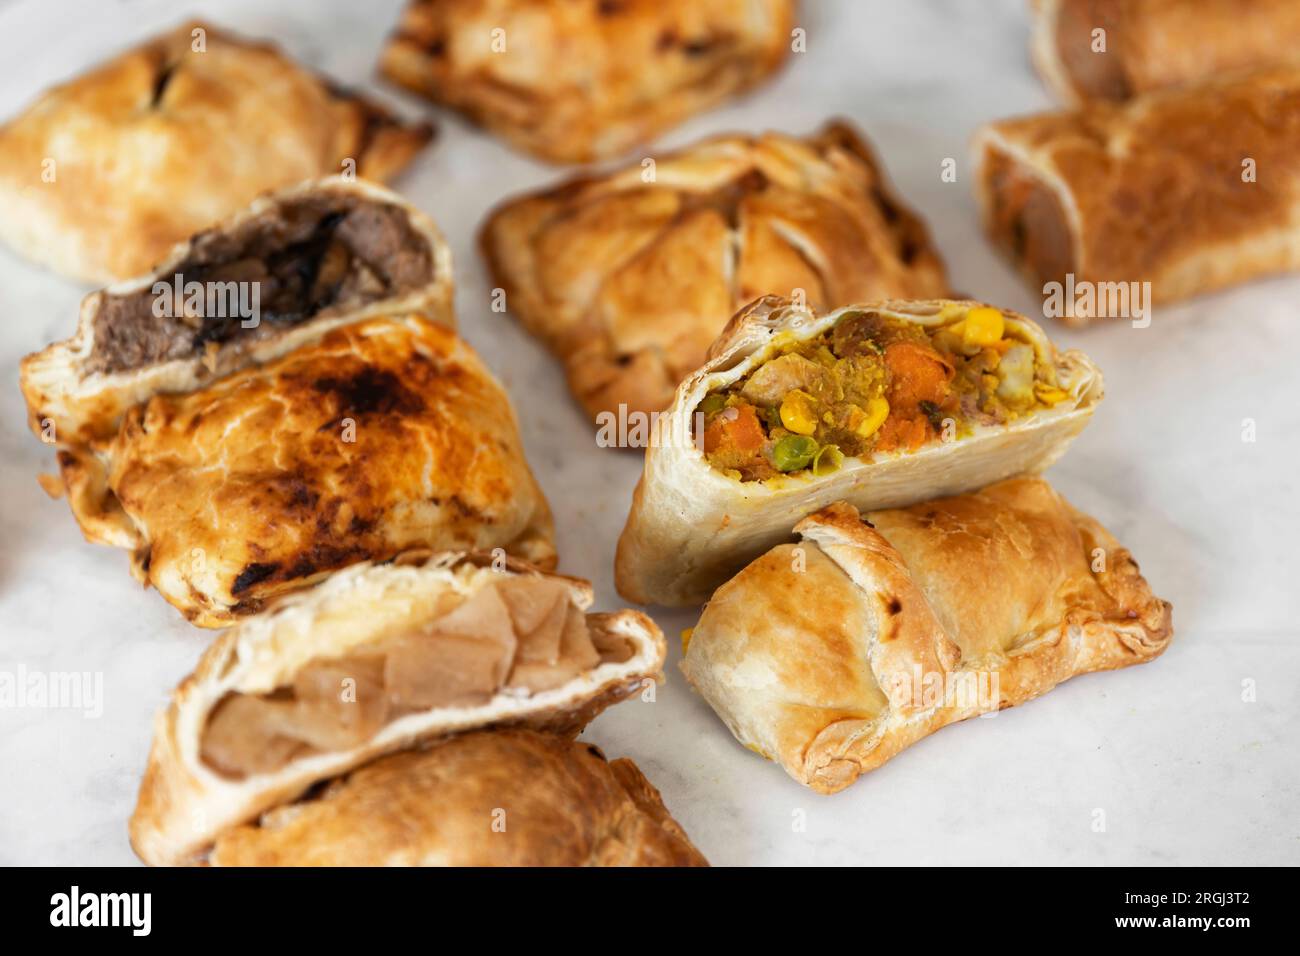 A variety of sweet and savory pastries, ready to captivate and satisfy every customer's craving. Stock Photo